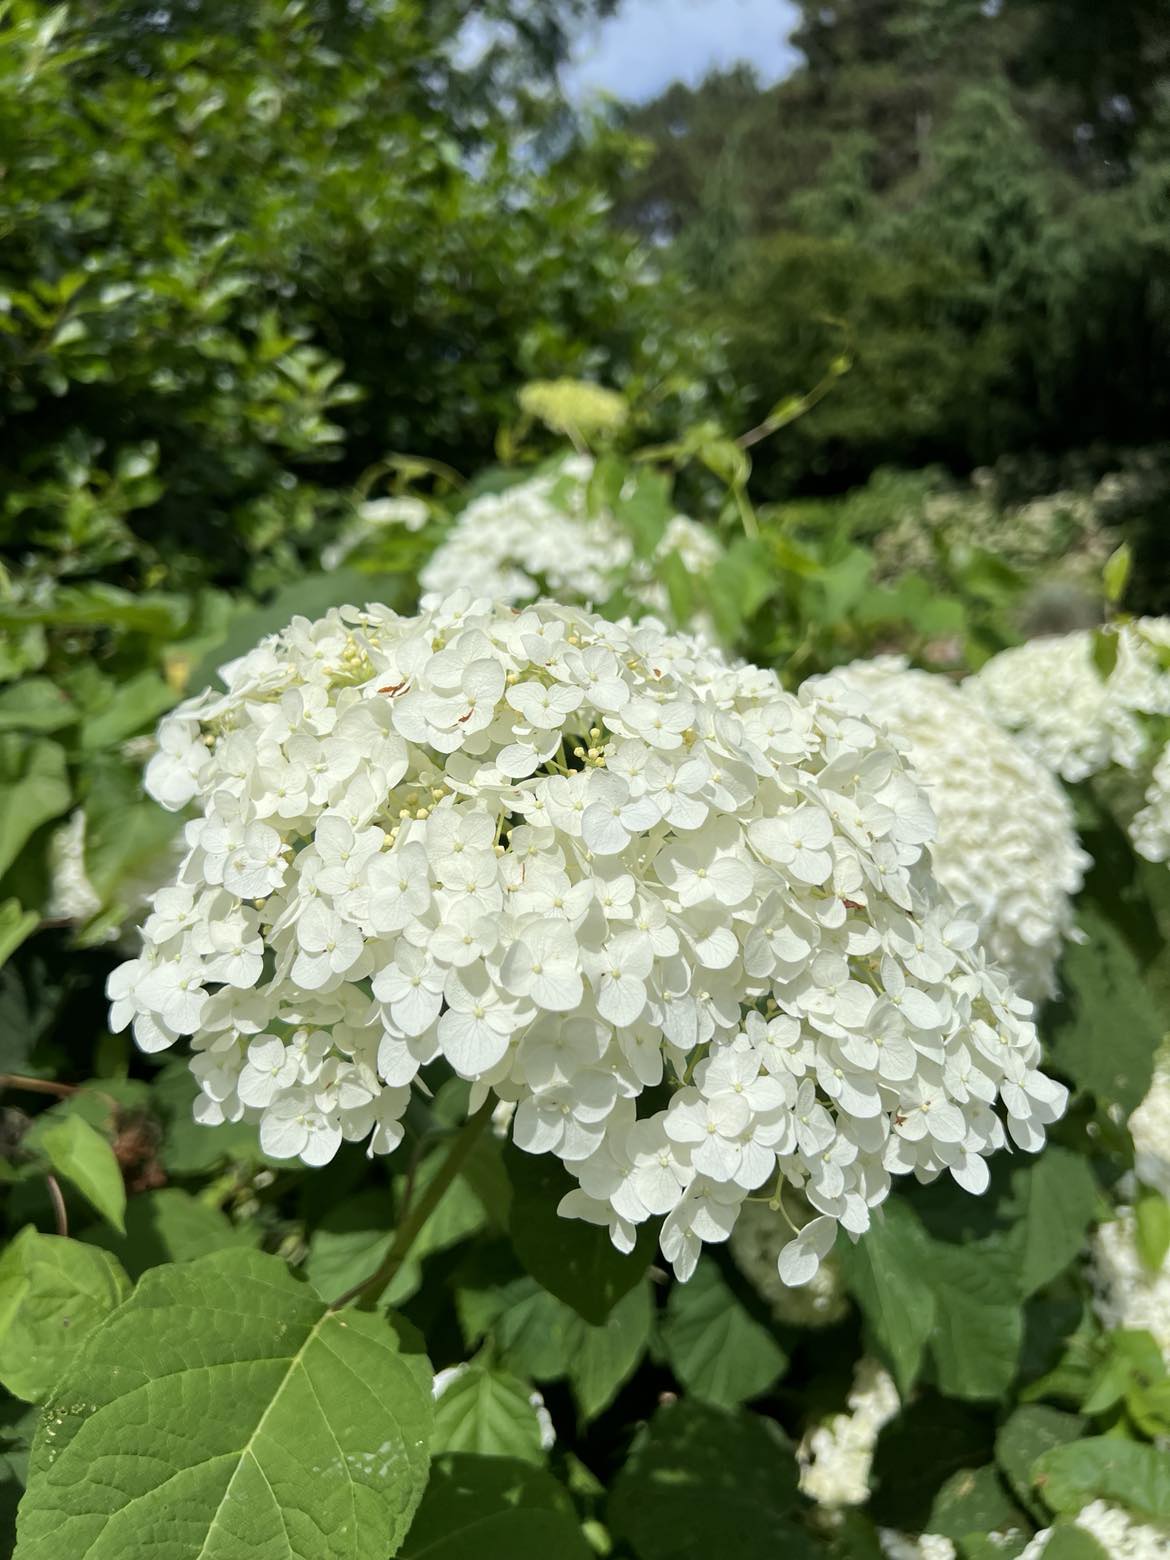 Close-up of a white hydrangea flower cluster in full bloom, surrounded by green leaves and foliage in the picturesque Applewood Estate, maintained by the Ruth Mott Foundation.